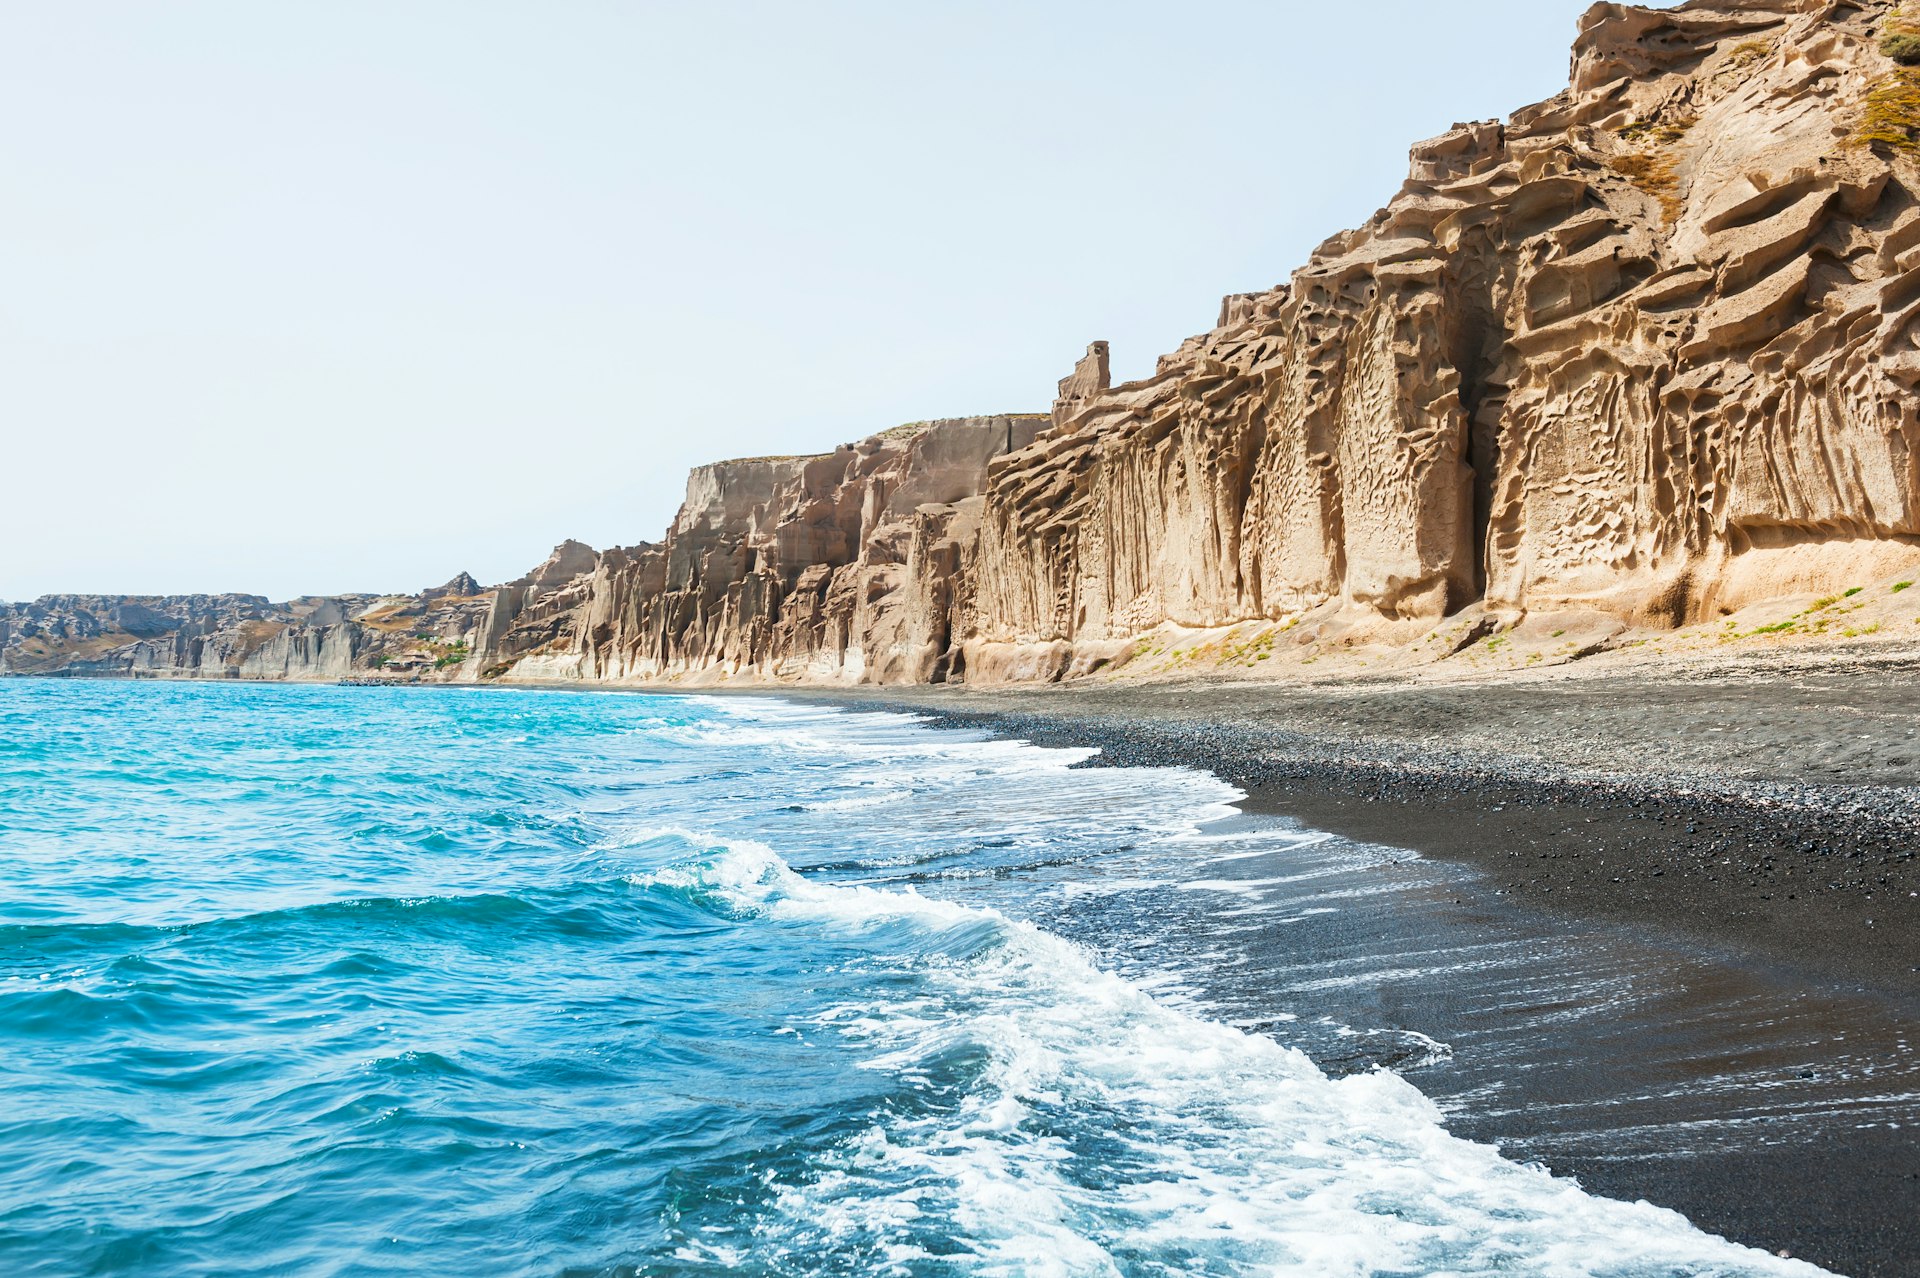 The sea laps on the shores of a black-sand beach, with sandstone cliffs towering over it